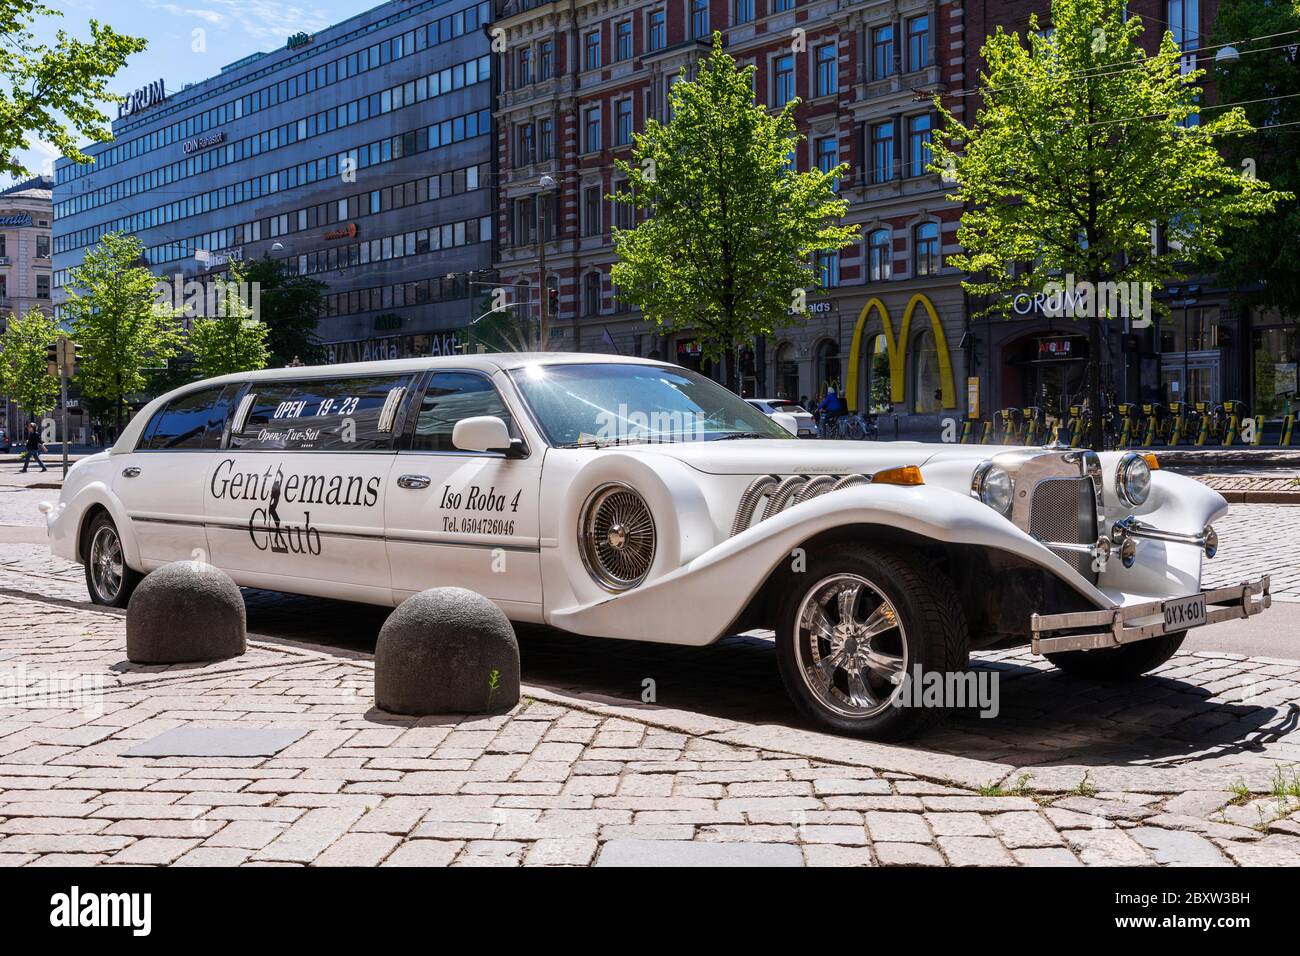 Modern marketing. Vintage Excalibur car wit logos left parked at main street downtown Helsinki. Parking tickets are cheaper than paid advertisement. Stock Photo